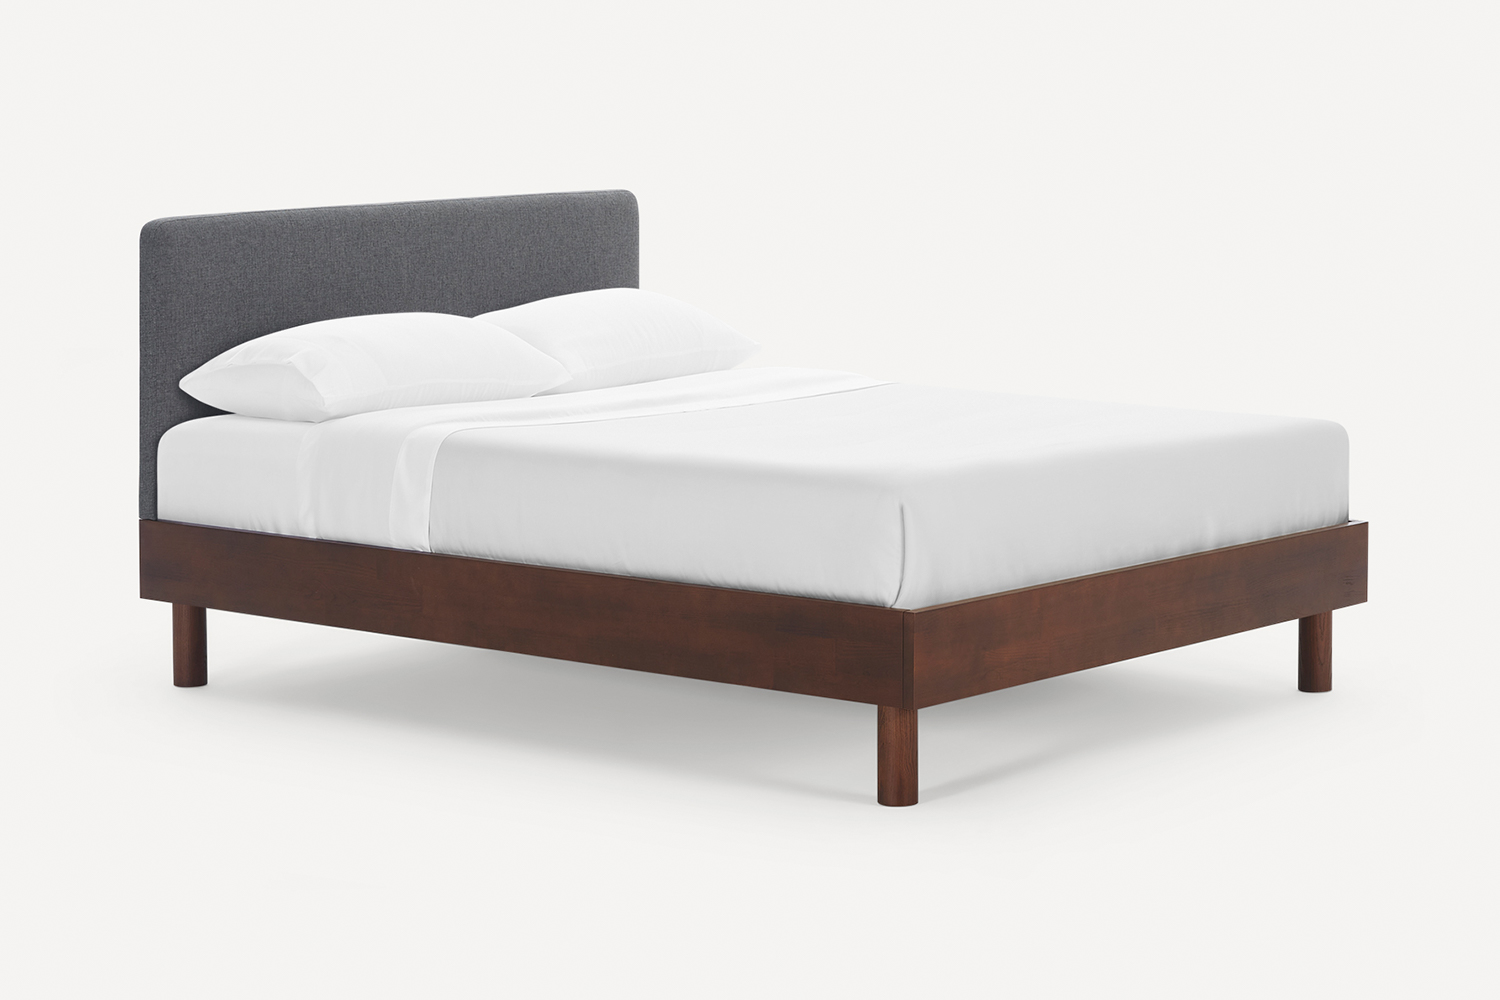 The Circa Bed from Burrow